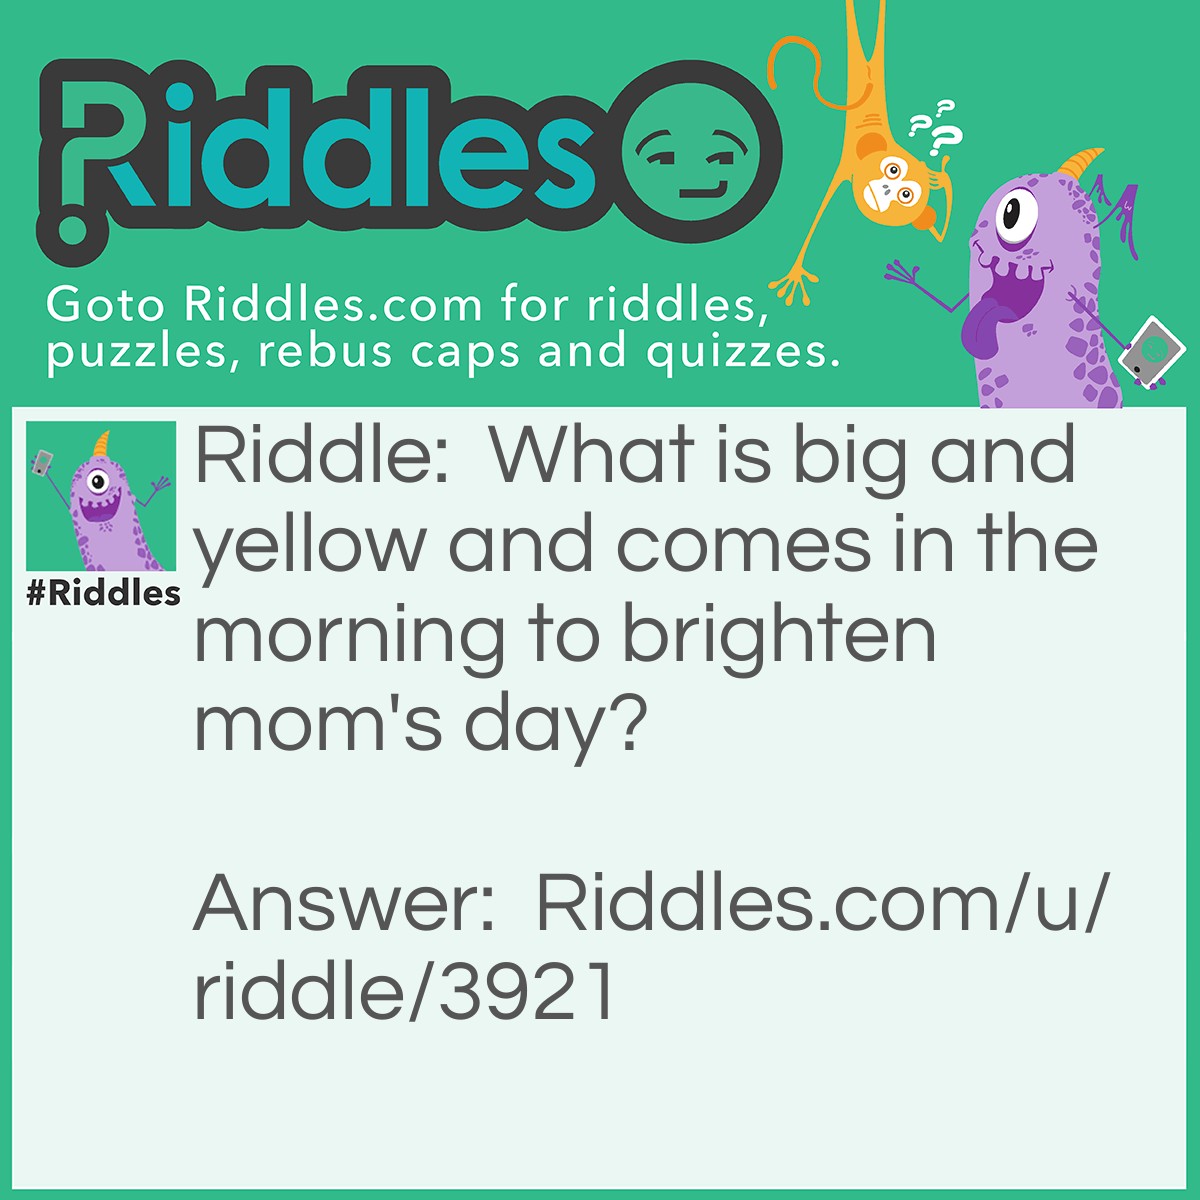 Riddle: What is big and yellow and comes in the morning to brighten mom's day? Answer: The school bus!